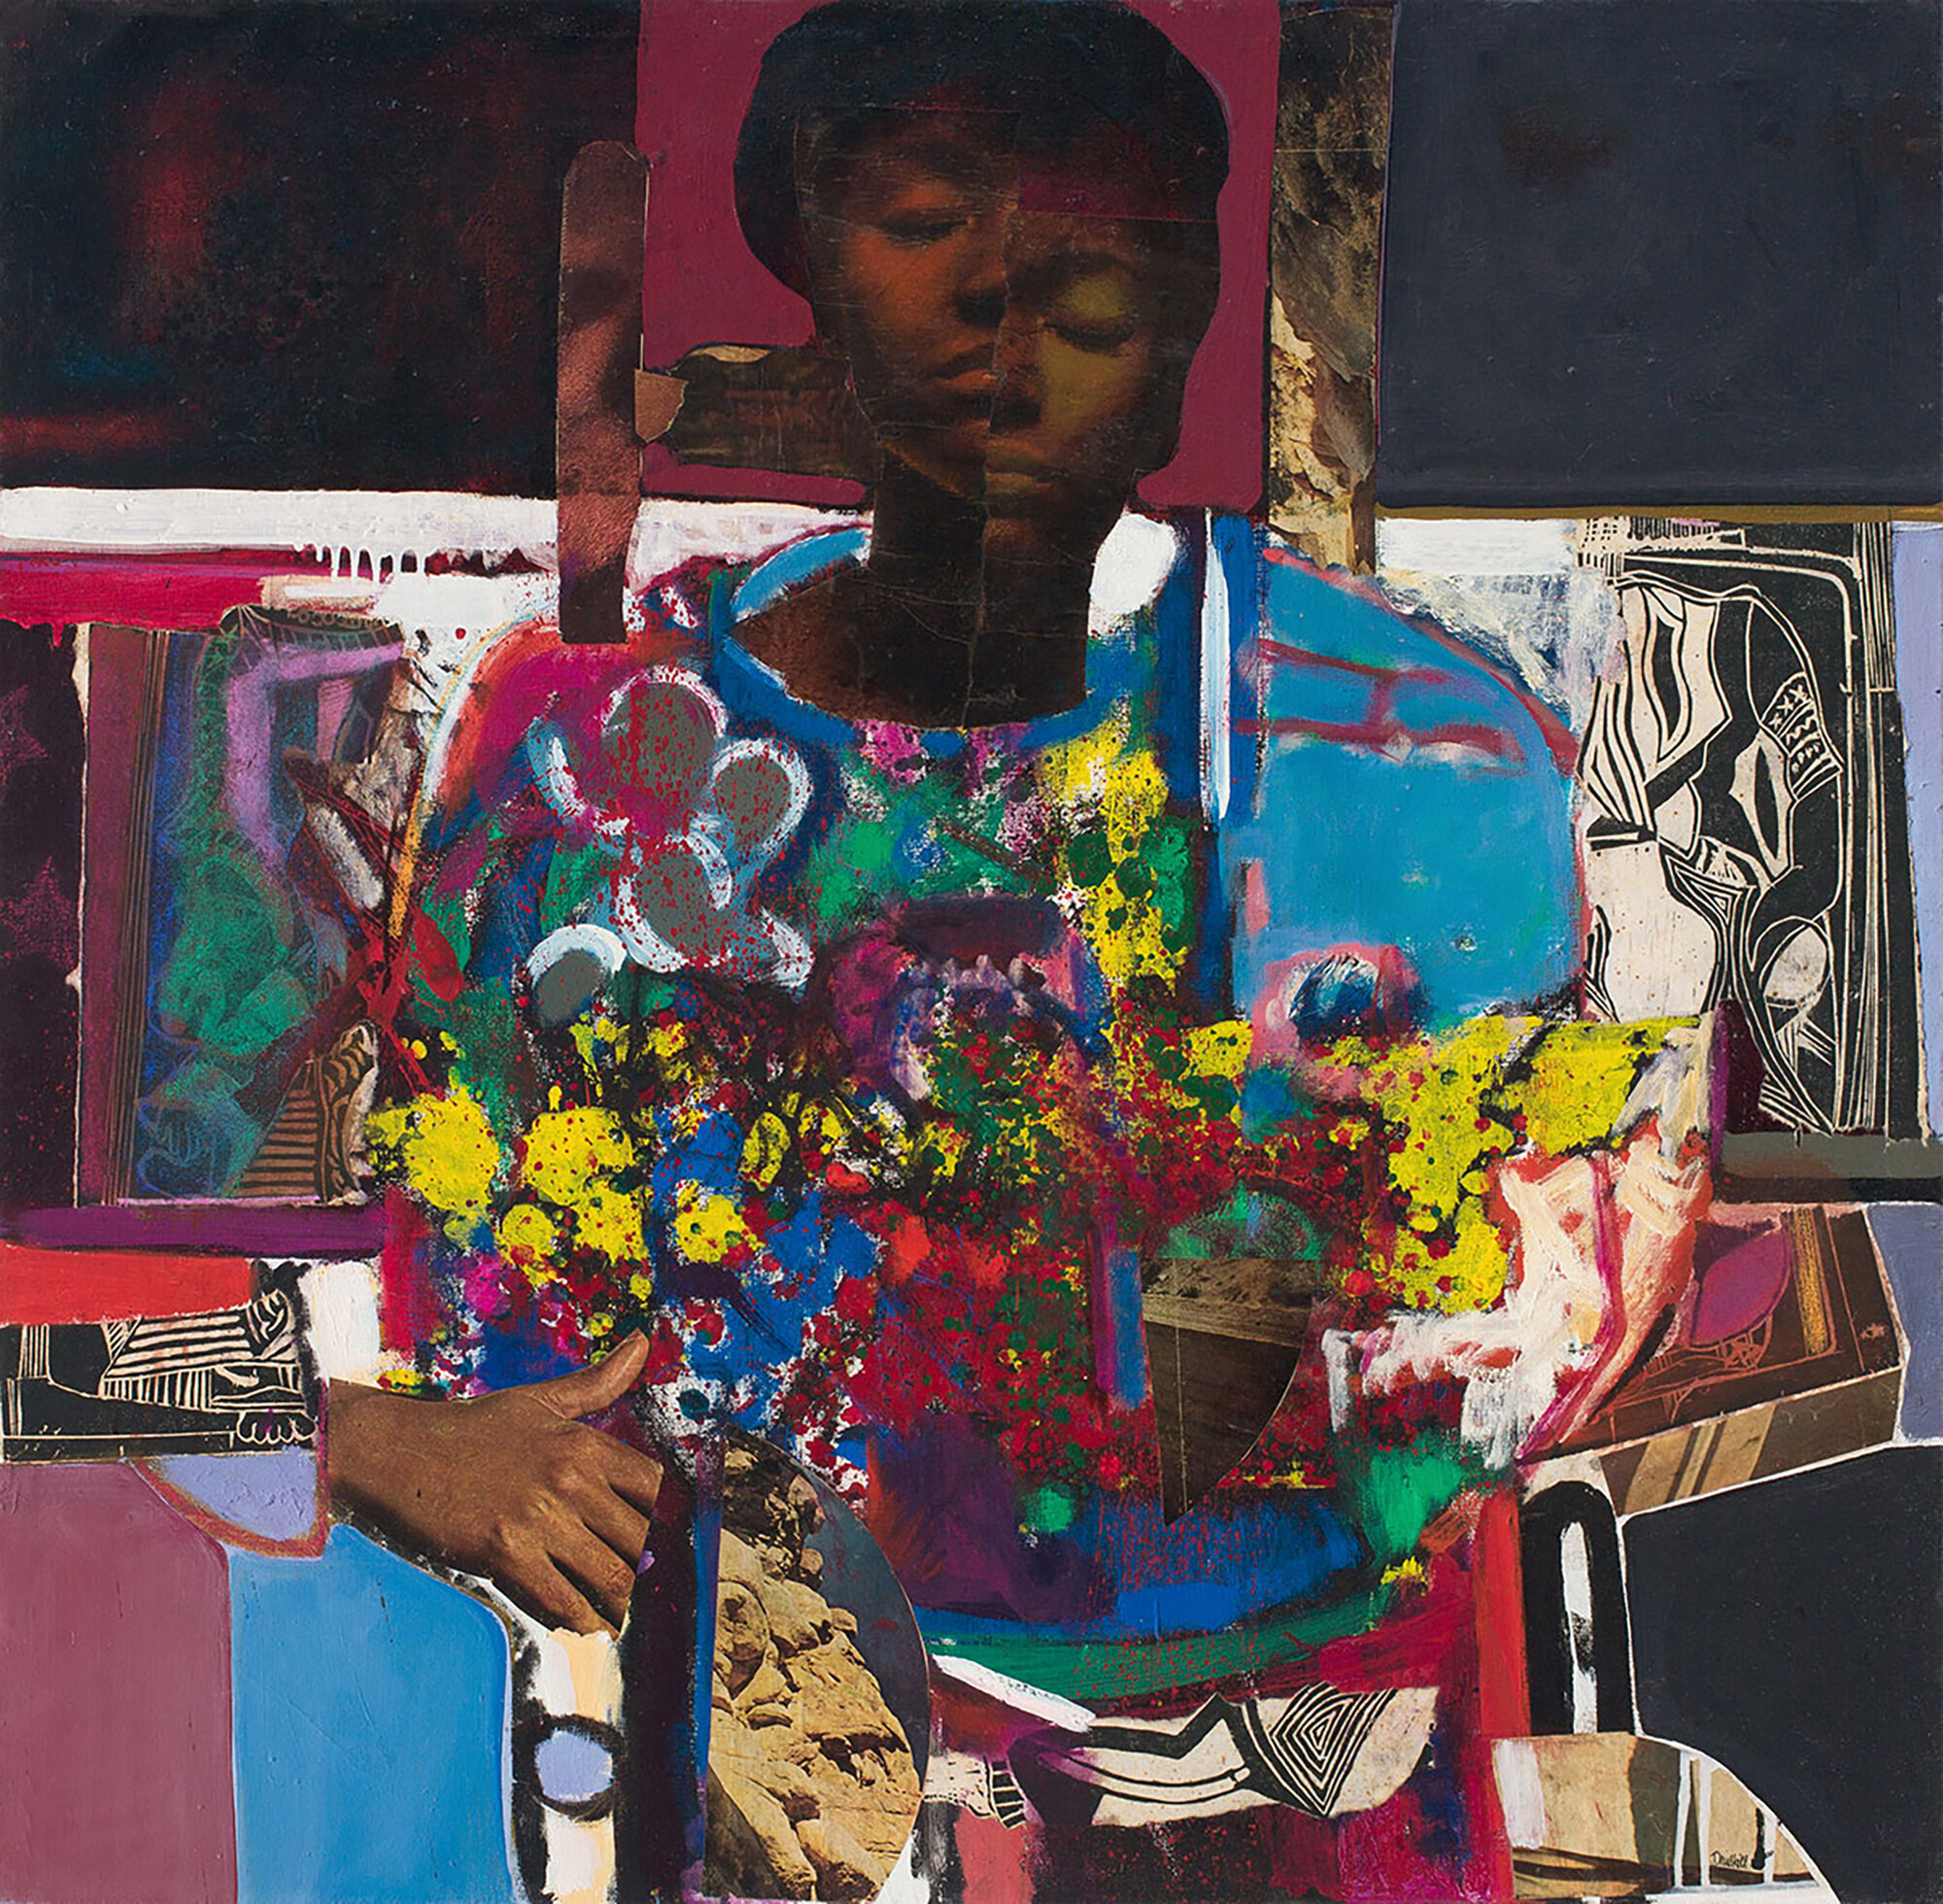  David C. Driskell (United States, 1931–2020),  Woman with Flowers , 1972, oil and collage on canvas, 37 1/2 x 38 1/2 inches. Art Bridges, Bentonville, Arkansas, AB.2018.3. © Estate of David C. Driskell 